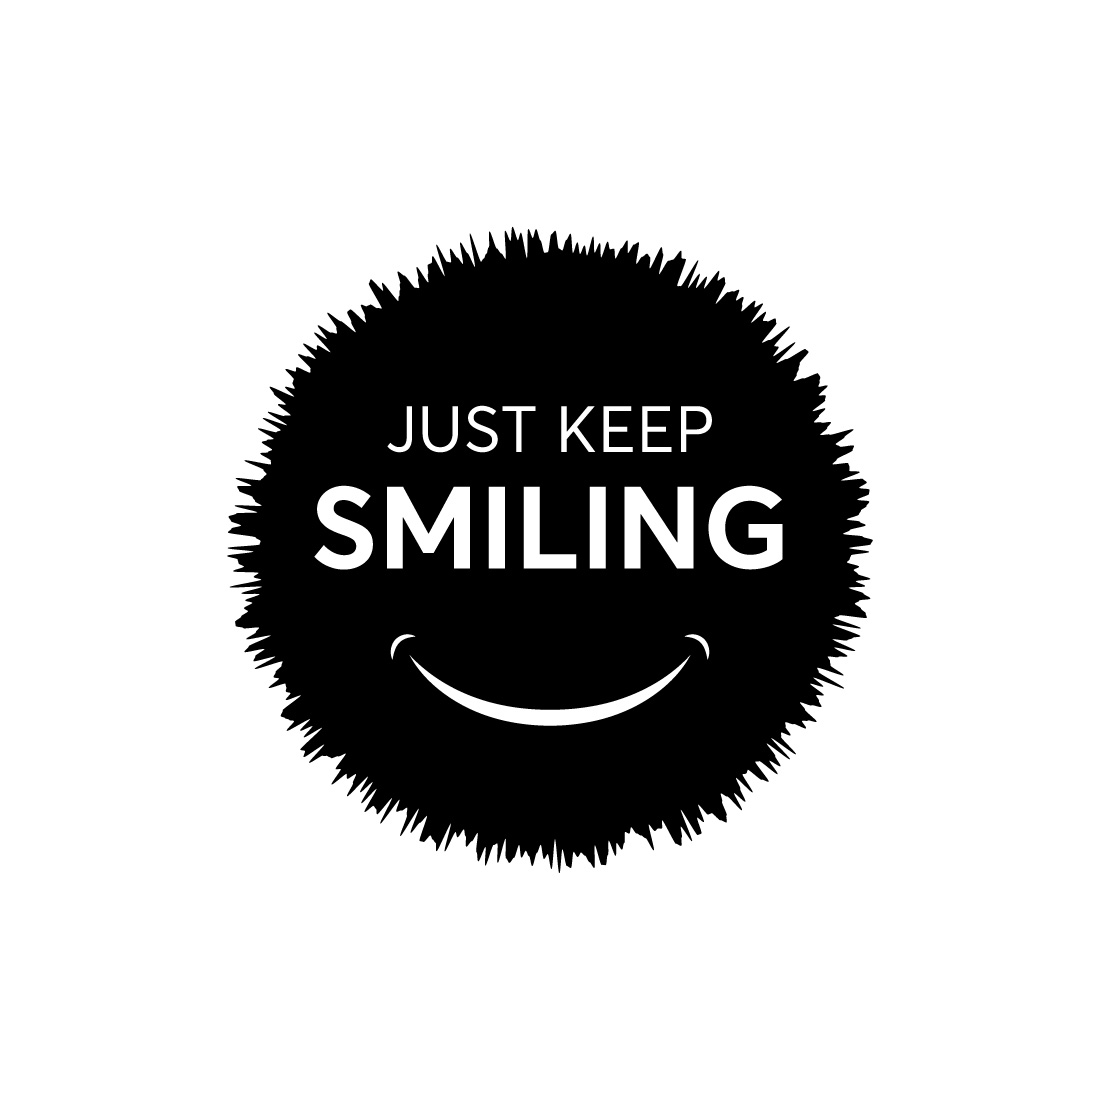 Just keep smiling tshirt design cover image.